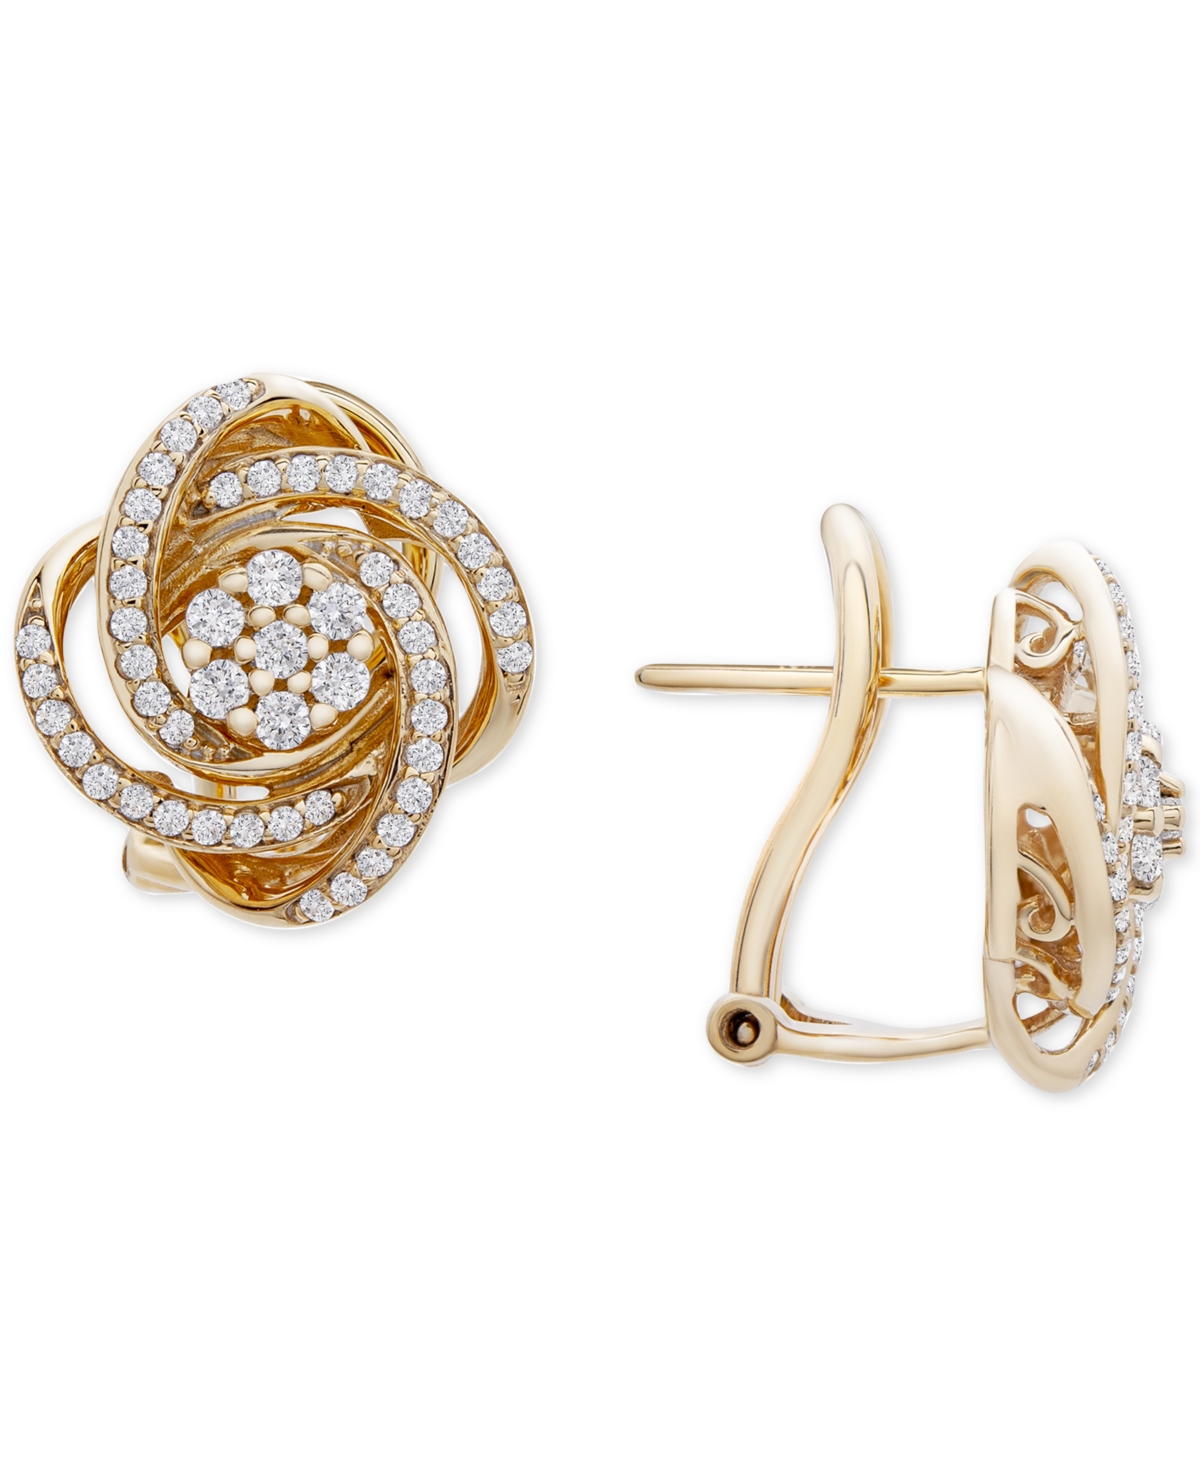 Diamond Love Knot Stud Earrings (1/2 ct. t.w.) in 14k Gold, Created for Macy's - Yellow Gold